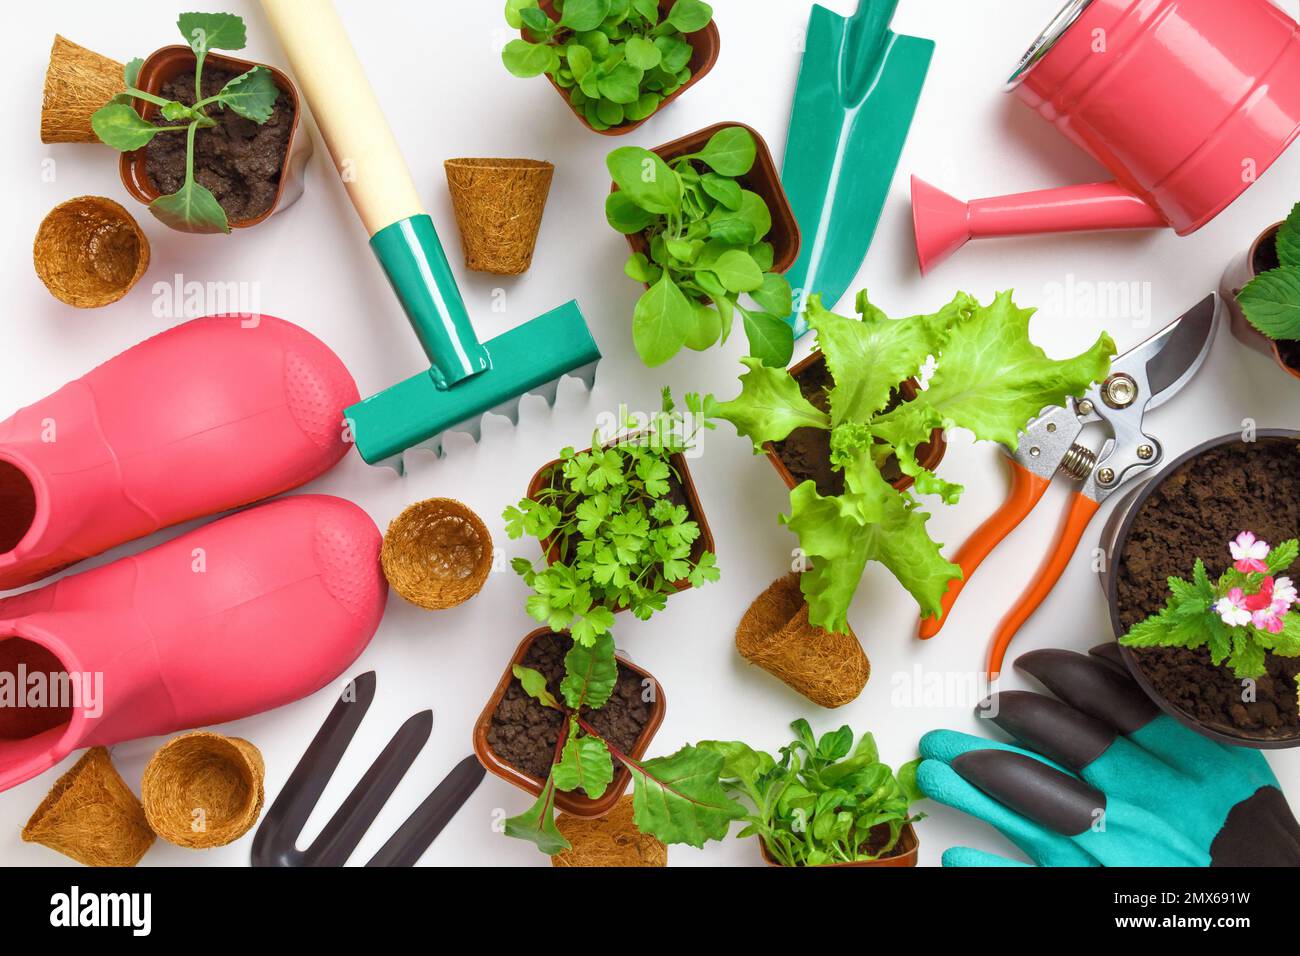 The concept of spring work and gardening. Tools and plants on the table. Stock Photo